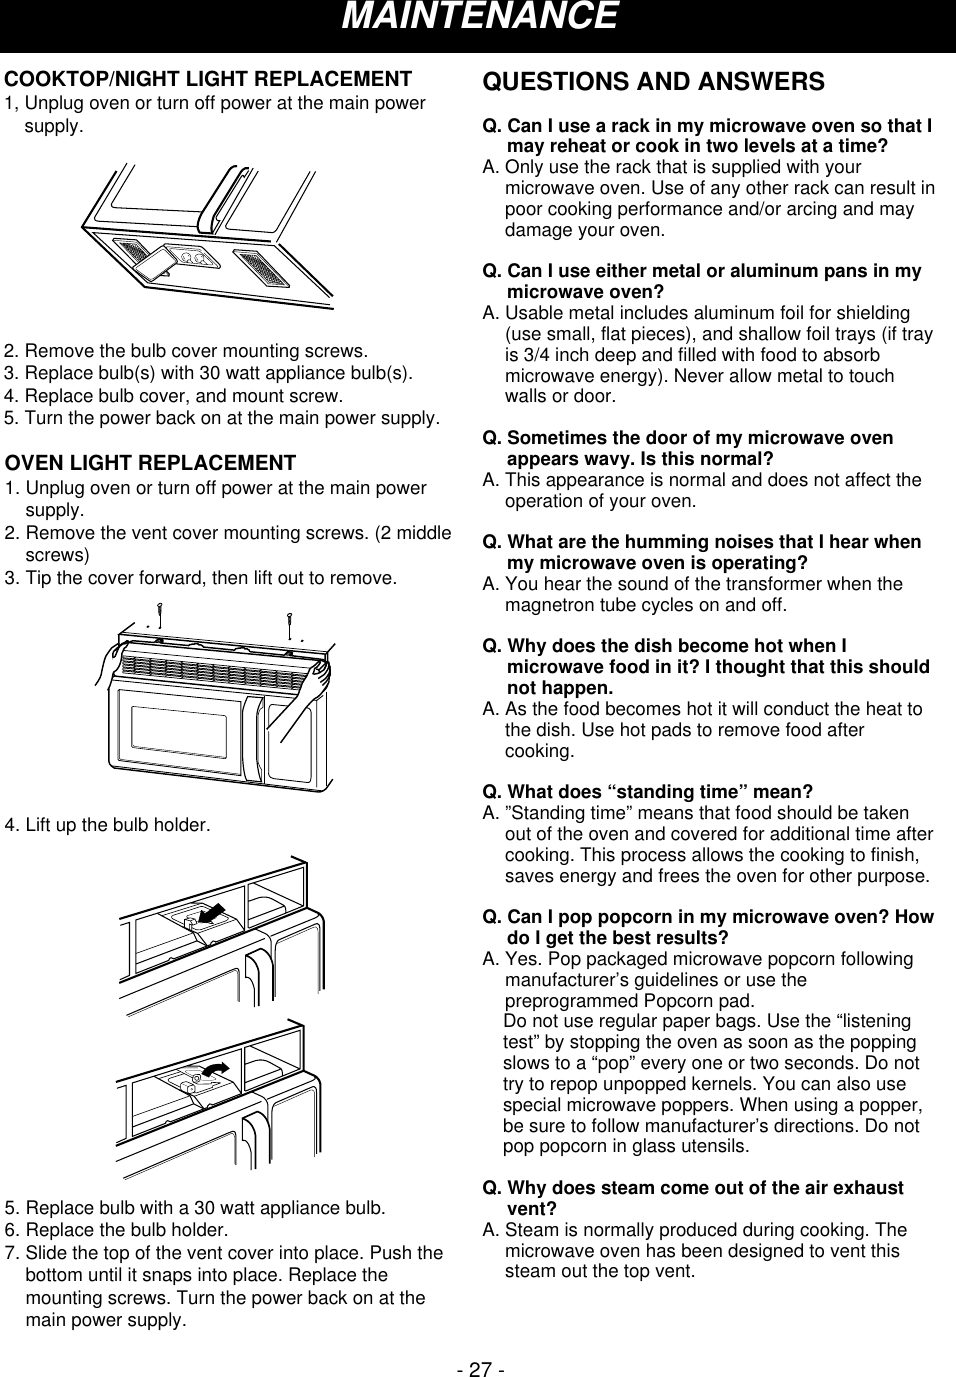 - 27 -MAINTENANCEOVEN LIGHT REPLACEMENT1. Unplug oven or turn off power at the main powersupply.2. Remove the vent cover mounting screws. (2 middlescrews)3. Tip the cover forward, then lift out to remove.4. Lift up the bulb holder.5. Replace bulb with a 30 watt appliance bulb.6. Replace the bulb holder.7. Slide the top of the vent cover into place. Push thebottom until it snaps into place. Replace themounting screws. Turn the power back on at themain power supply. COOKTOP/NIGHT LIGHT REPLACEMENT1, Unplug oven or turn off power at the main powersupply.2. Remove the bulb cover mounting screws.3. Replace bulb(s) with 30 watt appliance bulb(s).4. Replace bulb cover, and mount screw.5. Turn the power back on at the main power supply.QUESTIONS AND ANSWERSQ. Can I use a rack in my microwave oven so that Imay reheat or cook in two levels at a time?A. Only use the rack that is supplied with yourmicrowave oven. Use of any other rack can result inpoor cooking performance and/or arcing and maydamage your oven.Q. Can I use either metal or aluminum pans in mymicrowave oven?A. Usable metal includes aluminum foil for shielding(use small, flat pieces), and shallow foil trays (if trayis 3/4 inch deep and filled with food to absorbmicrowave energy). Never allow metal to touchwalls or door.Q. Sometimes the door of my microwave ovenappears wavy. Is this normal?A. This appearance is normal and does not affect theoperation of your oven.Q. What are the humming noises that I hear whenmy microwave oven is operating?A. You hear the sound of the transformer when themagnetron tube cycles on and off.Q. Why does the dish become hot when Imicrowave food in it? I thought that this shouldnot happen.A. As the food becomes hot it will conduct the heat tothe dish. Use hot pads to remove food aftercooking.Q. What does “standing time” mean?A. ”Standing time” means that food should be takenout of the oven and covered for additional time aftercooking. This process allows the cooking to finish,saves energy and frees the oven for other purpose.Q. Can I pop popcorn in my microwave oven? Howdo I get the best results?A. Yes. Pop packaged microwave popcorn followingmanufacturer’s guidelines or use thepreprogrammed Popcorn pad.     Do not use regular paper bags. Use the “listeningtest” by stopping the oven as soon as the poppingslows to a “pop” every one or two seconds. Do nottry to repop unpopped kernels. You can also usespecial microwave poppers. When using a popper,be sure to follow manufacturer’s directions. Do notpop popcorn in glass utensils.Q. Why does steam come out of the air exhaustvent?A. Steam is normally produced during cooking. Themicrowave oven has been designed to vent thissteam out the top vent.